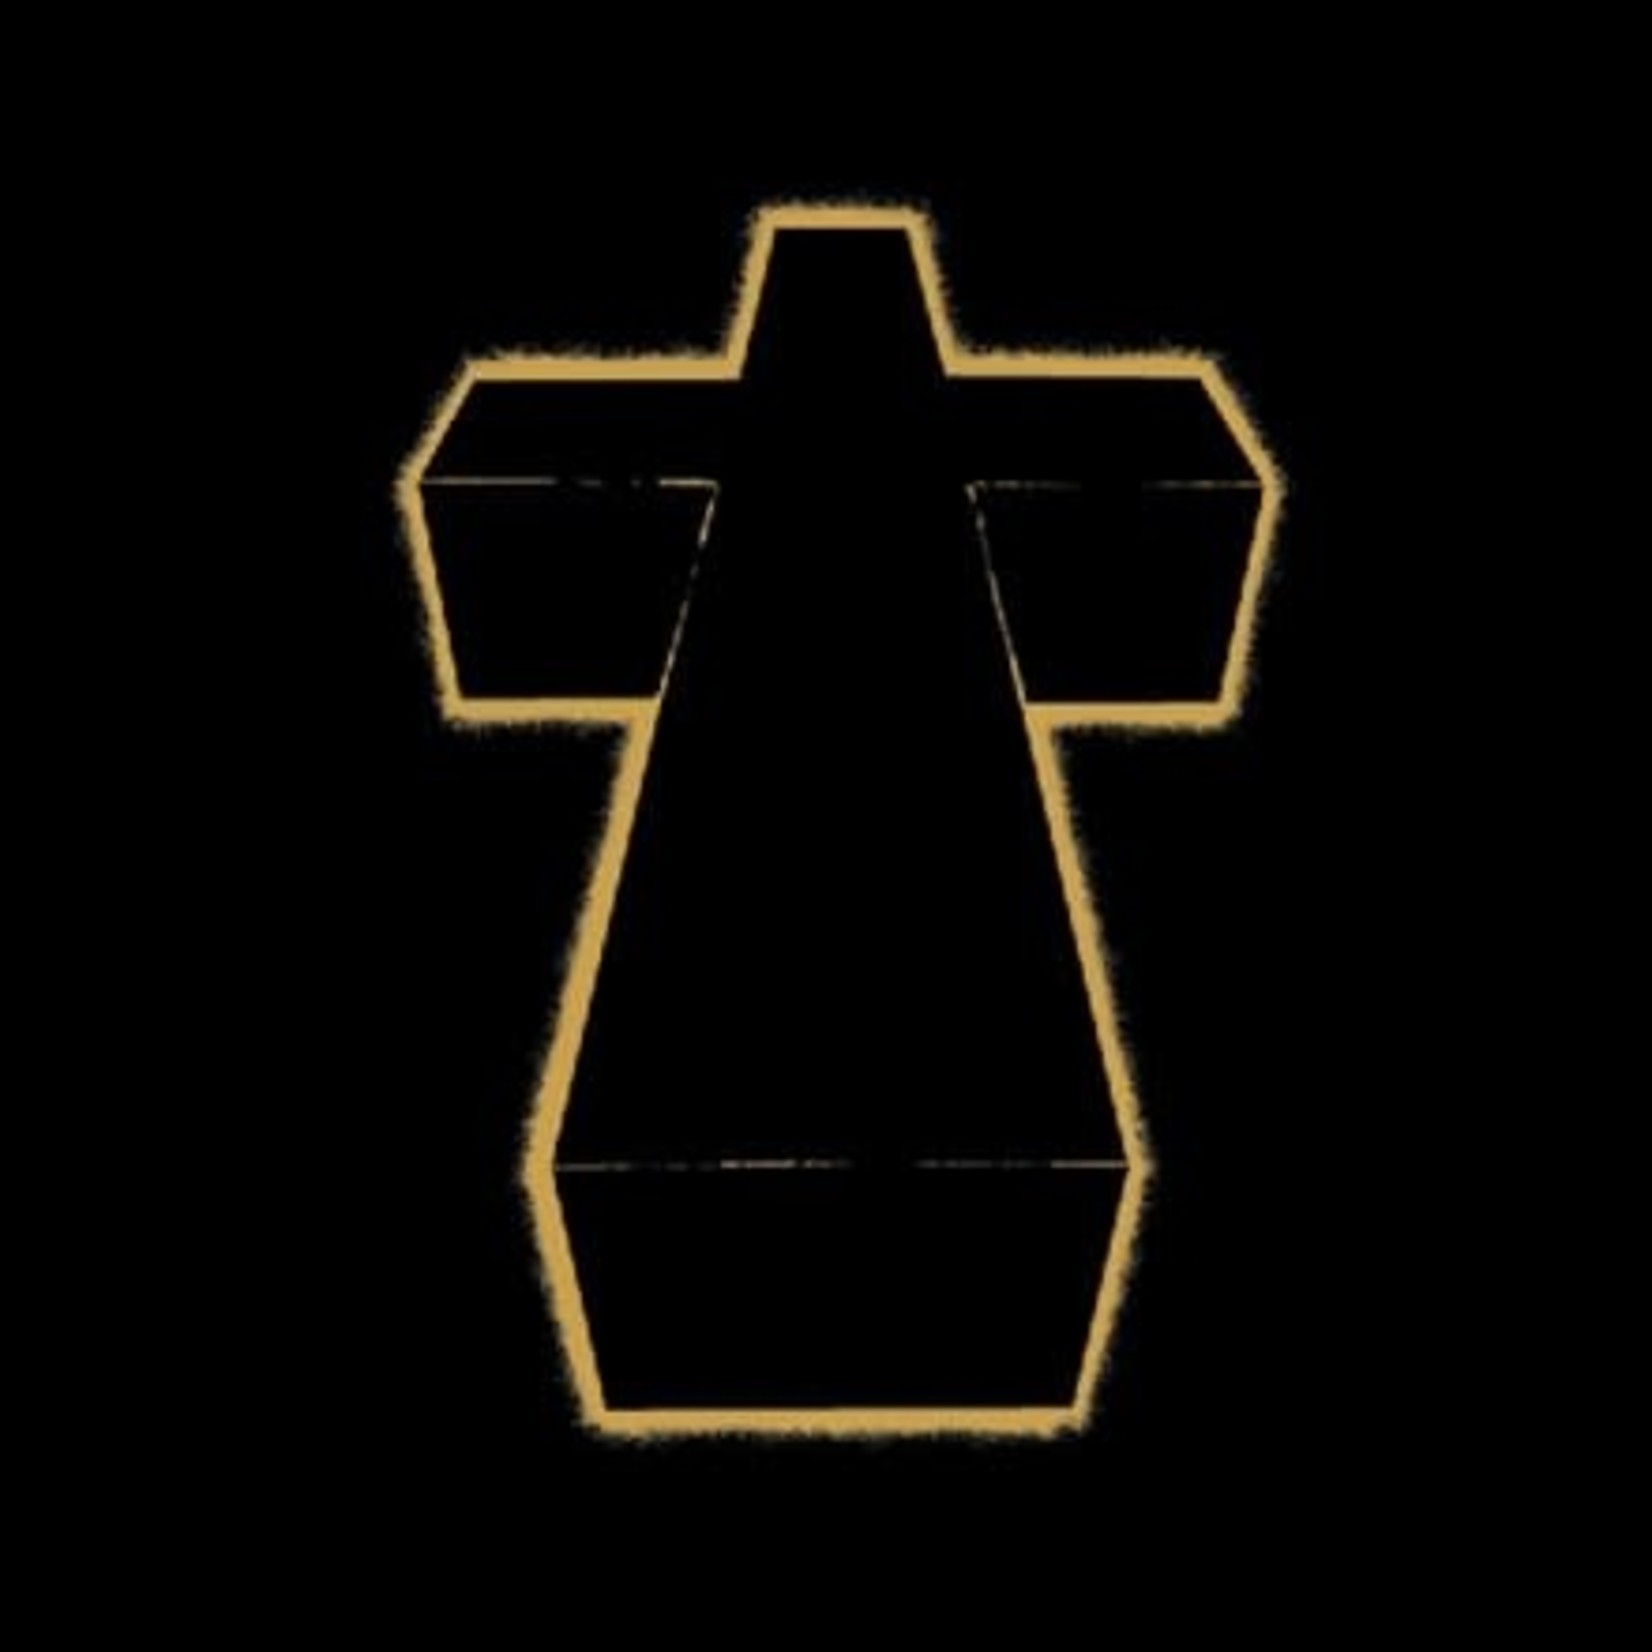 [New] Justice - Cross (2LP, Deluxe Edition, Import)